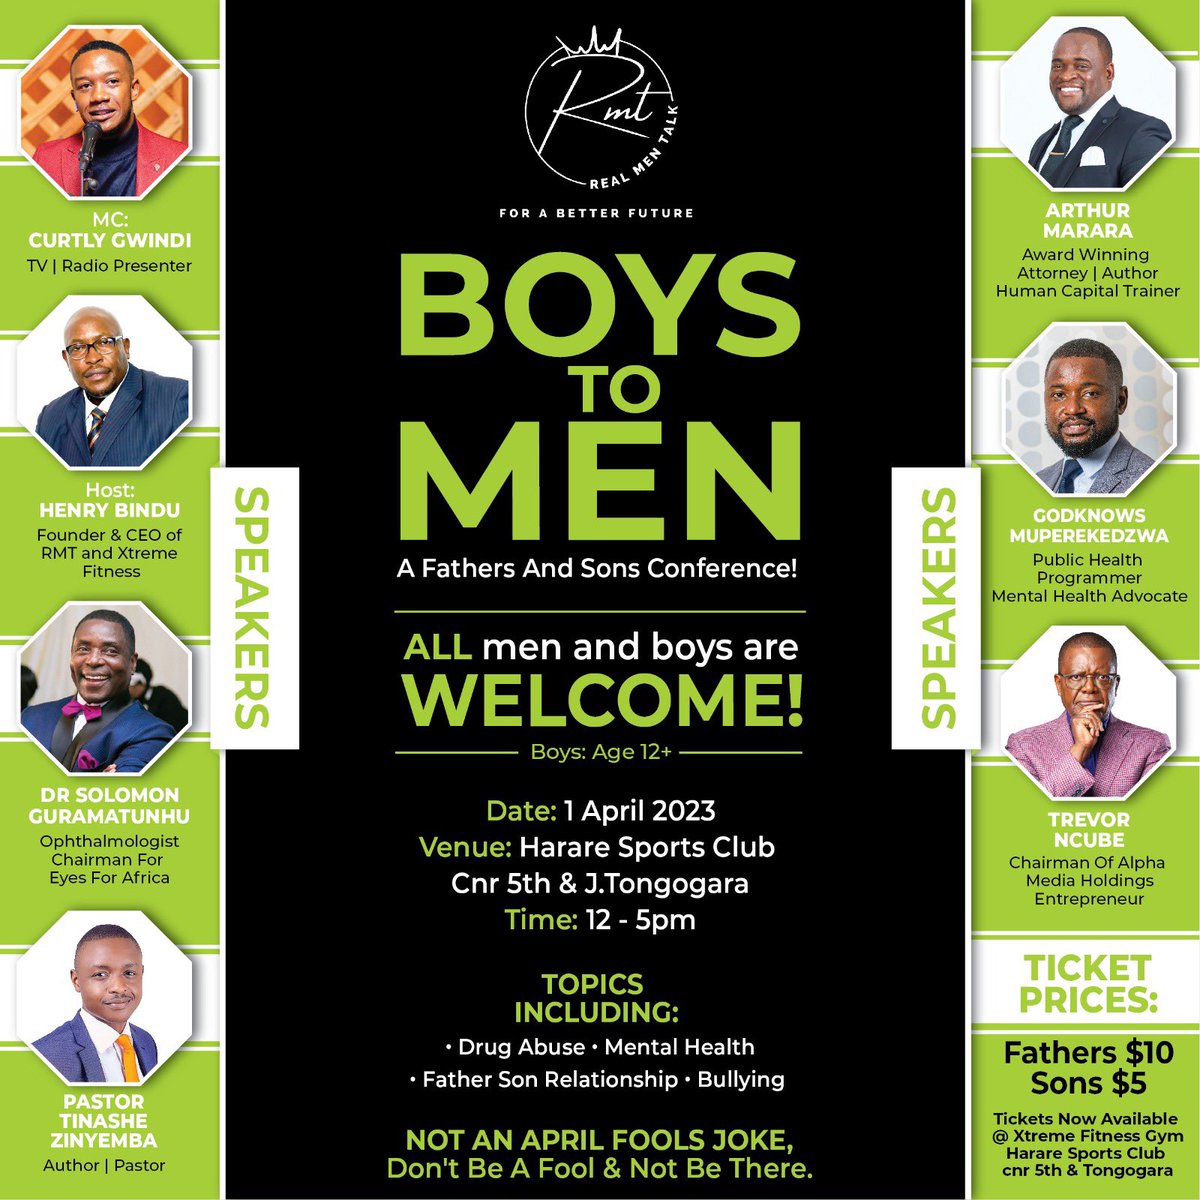 I am looking forward to this gathering tomorrow. Nations are built a family and a person at a time. The relationship between fathers and sons is hugely important in this regard. Join us if you can!